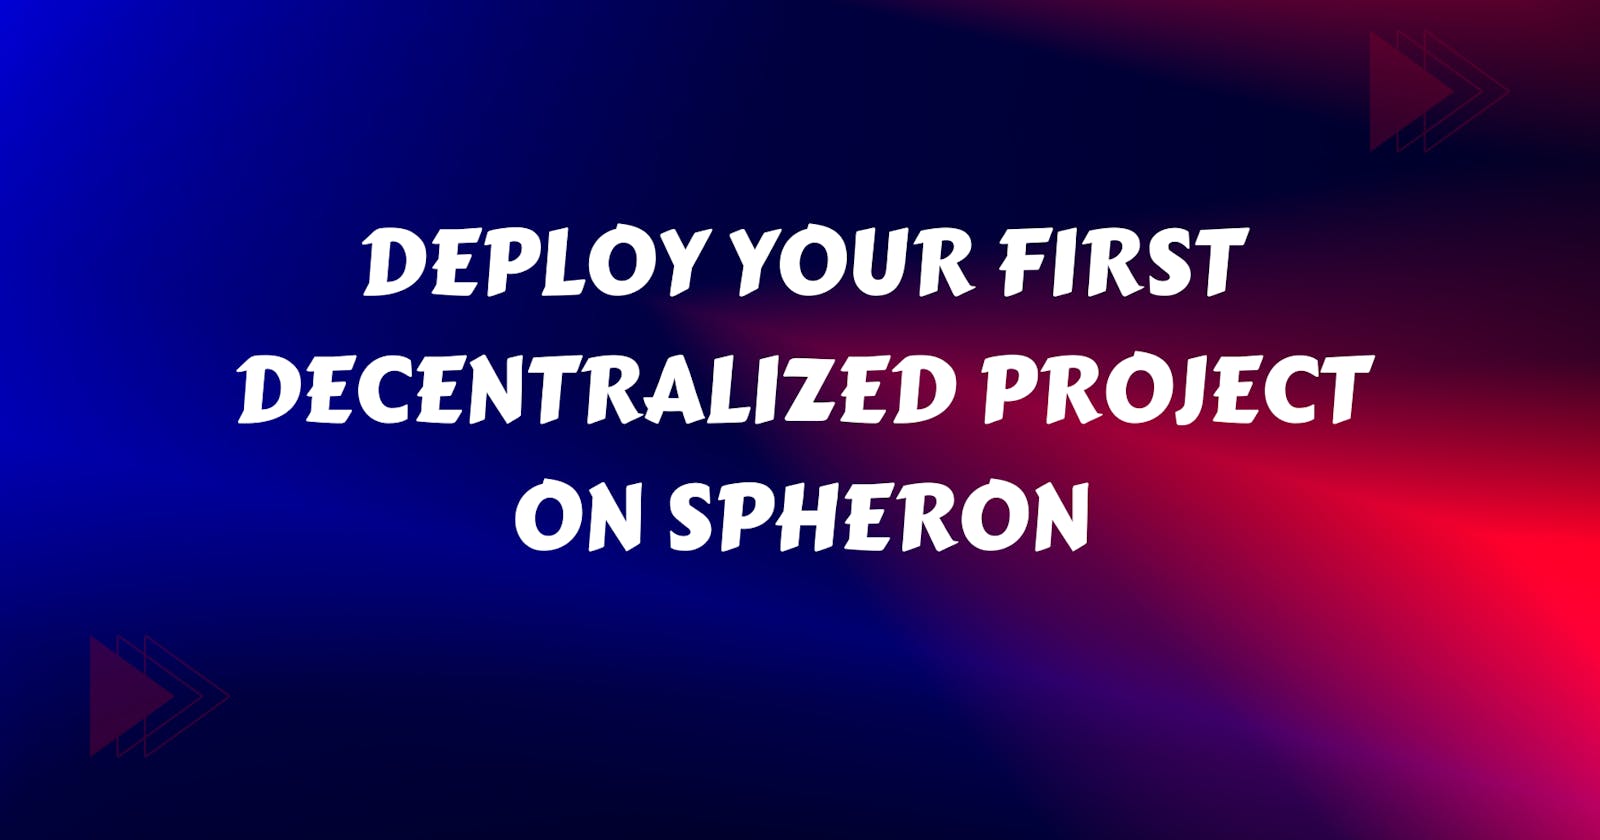 Deploy your first Decentralized Project on Spheron